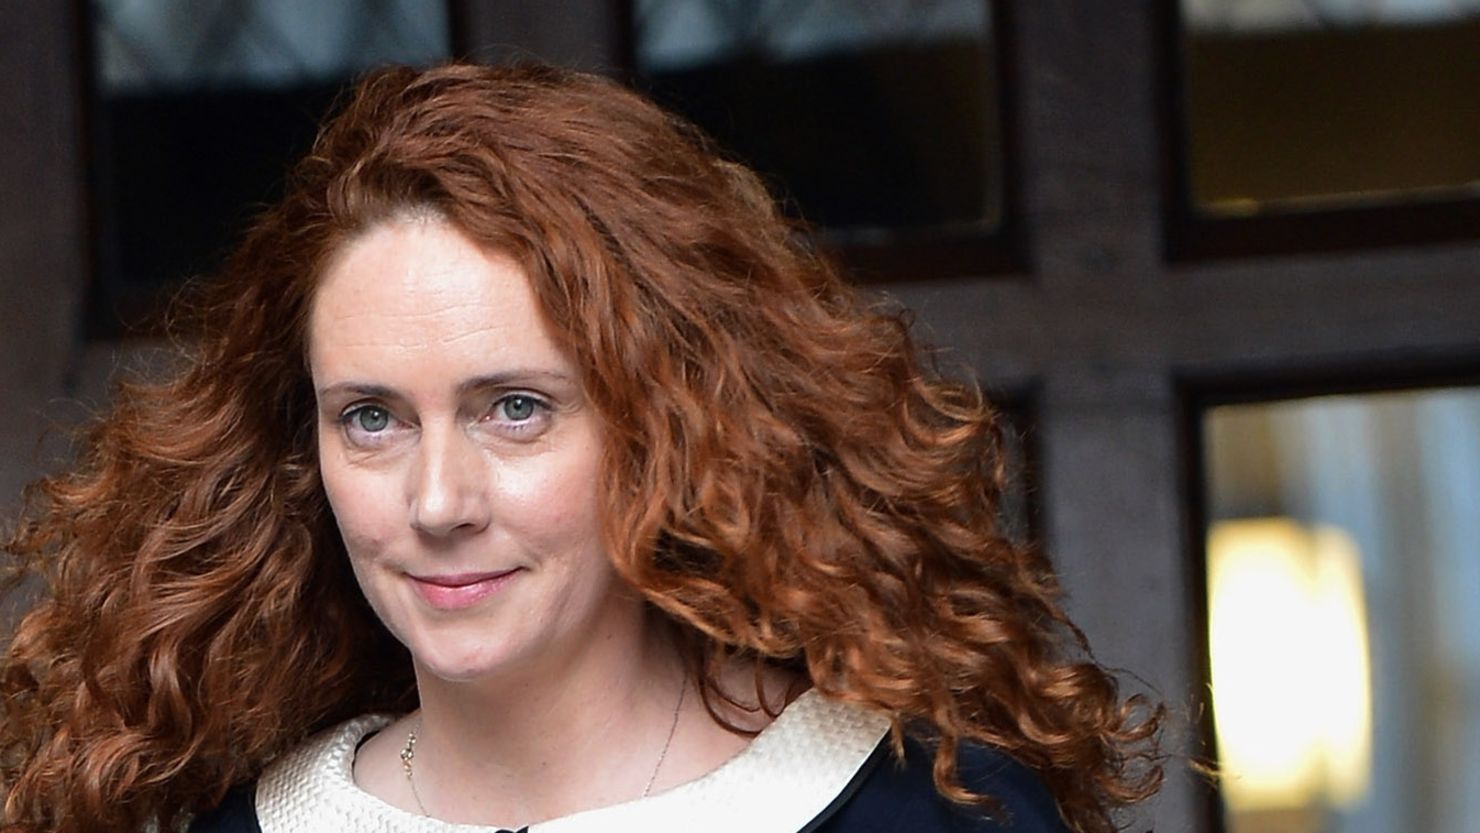 Former News of the World editor Rebekah Brooks will face trial in September 2013 for phone hacking.